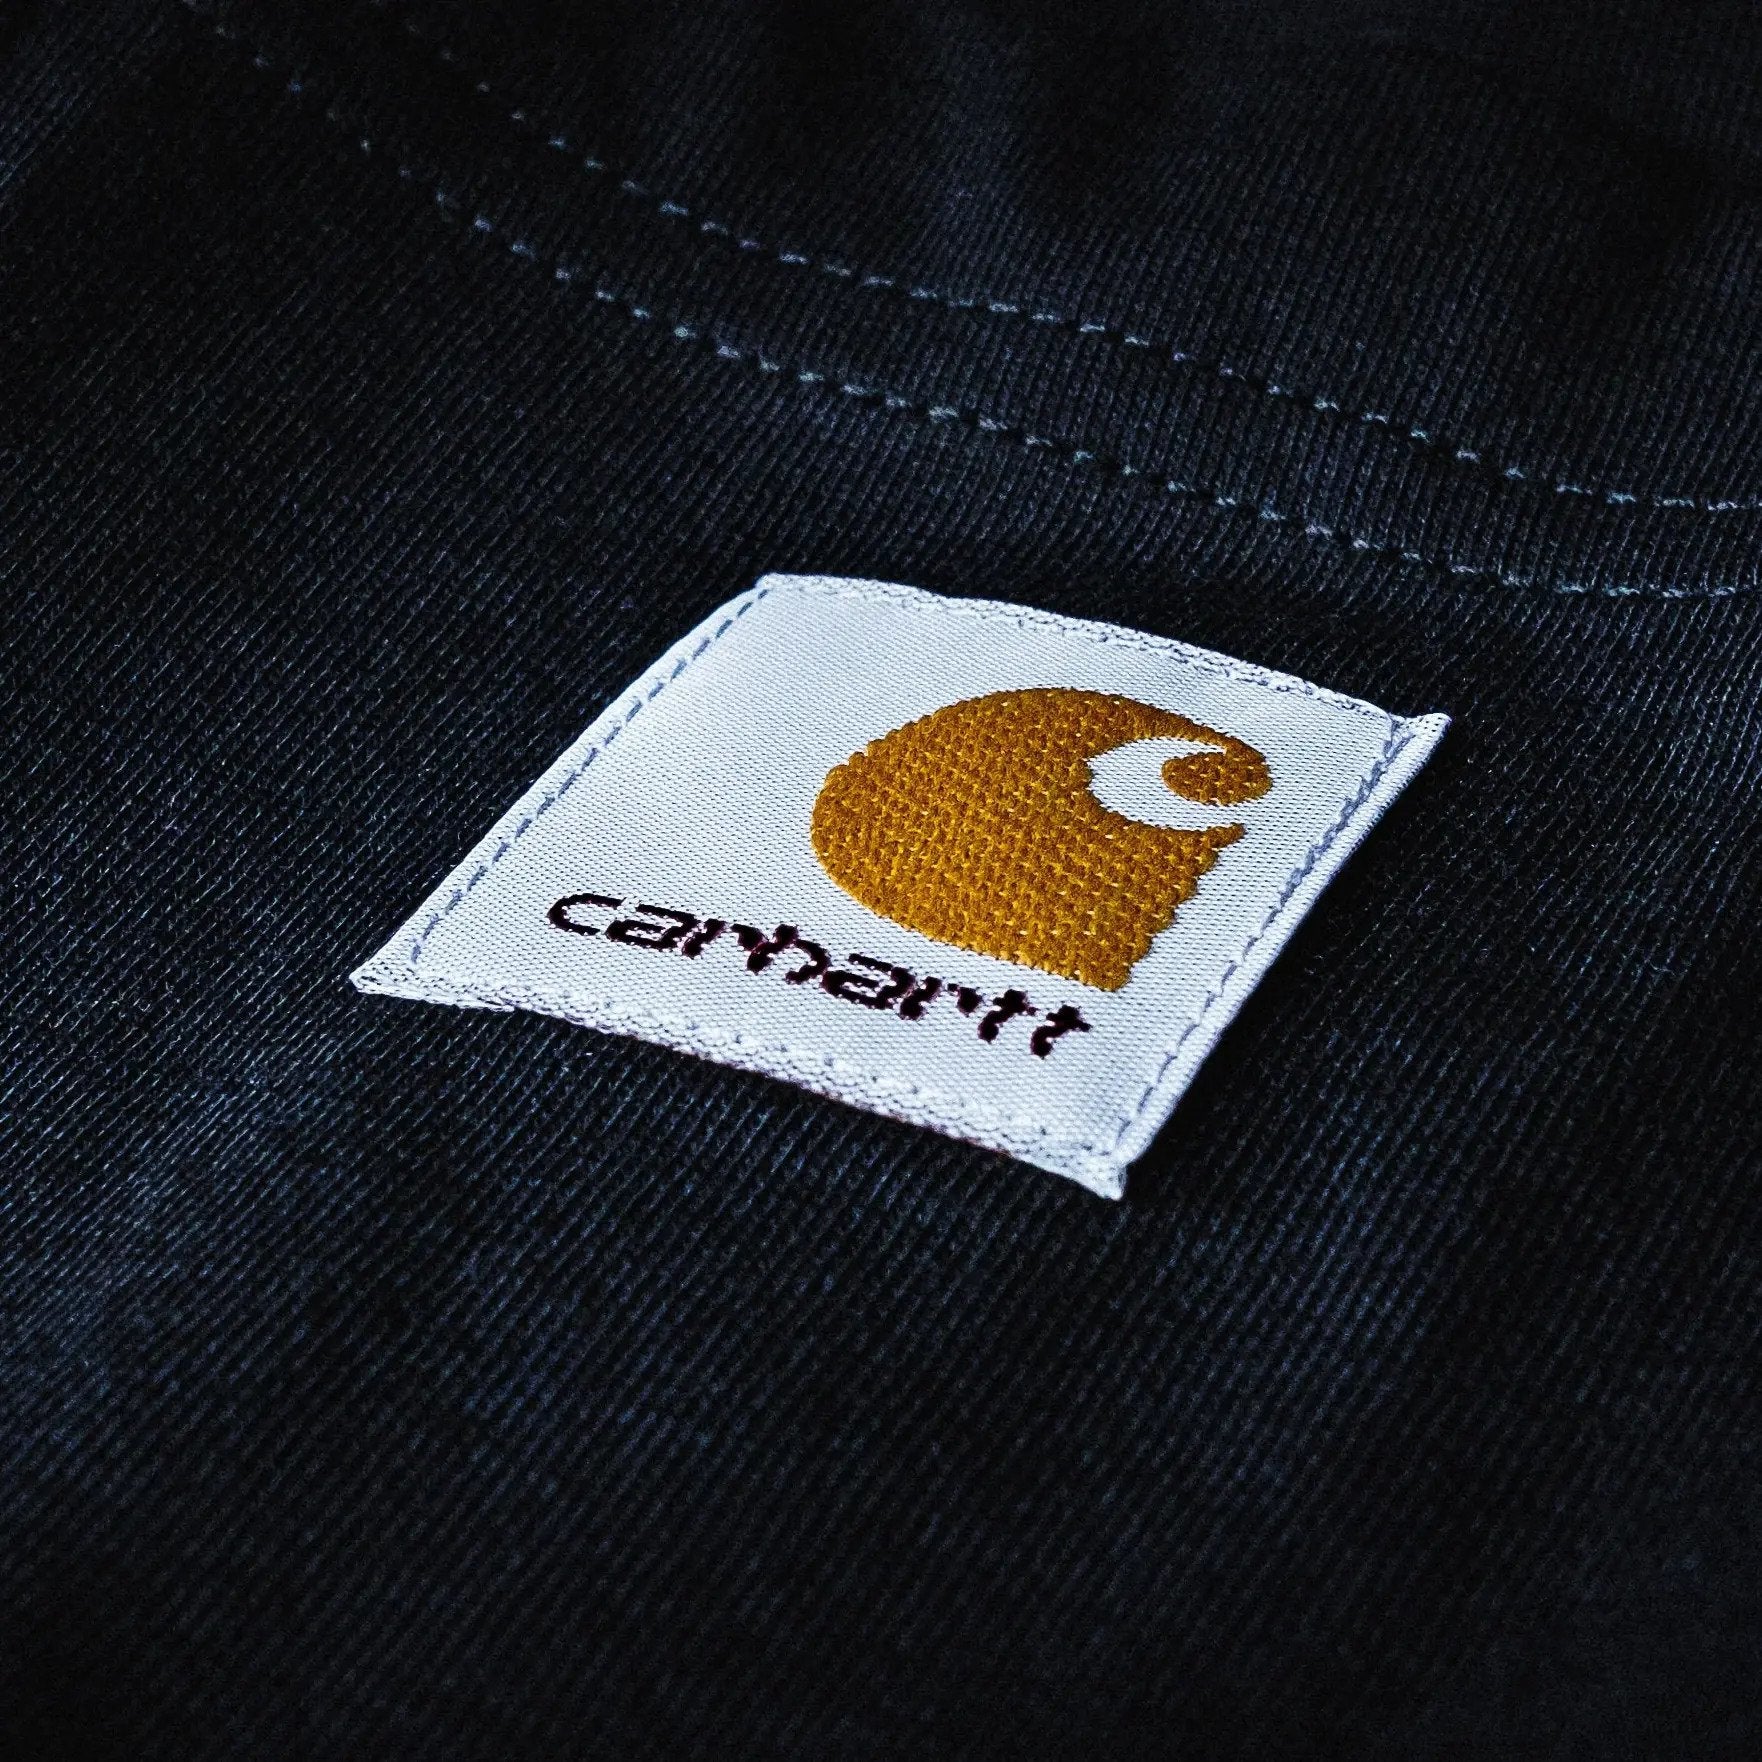 From Workbenches to Street Corners: The History of Carhartt